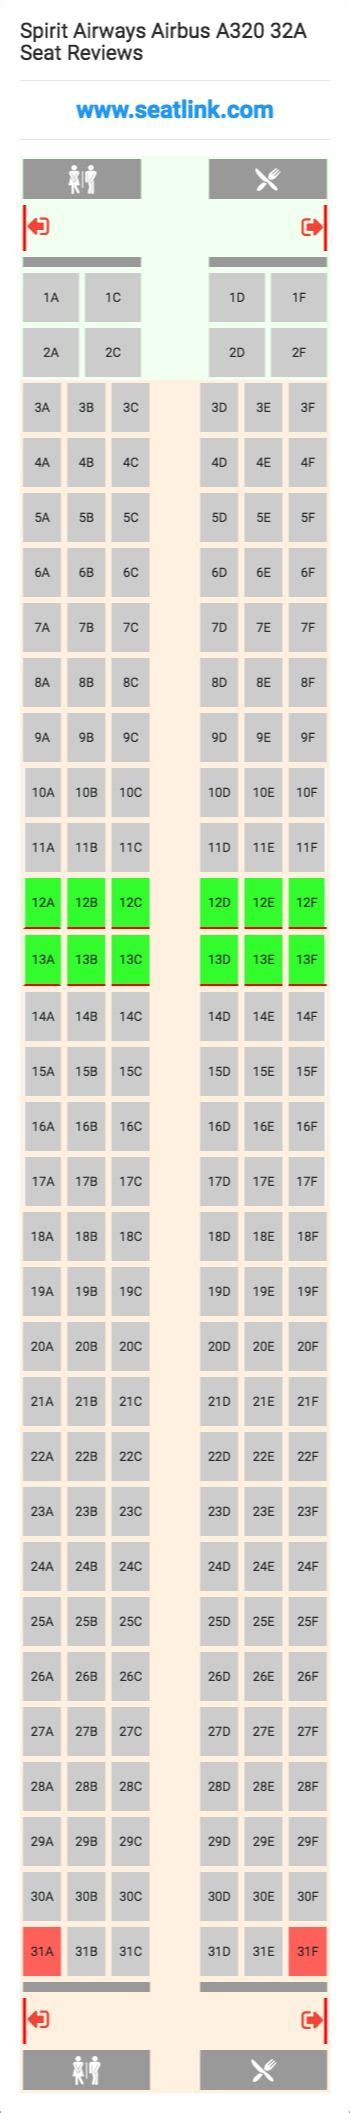 Seat Chart Spirit Airlines